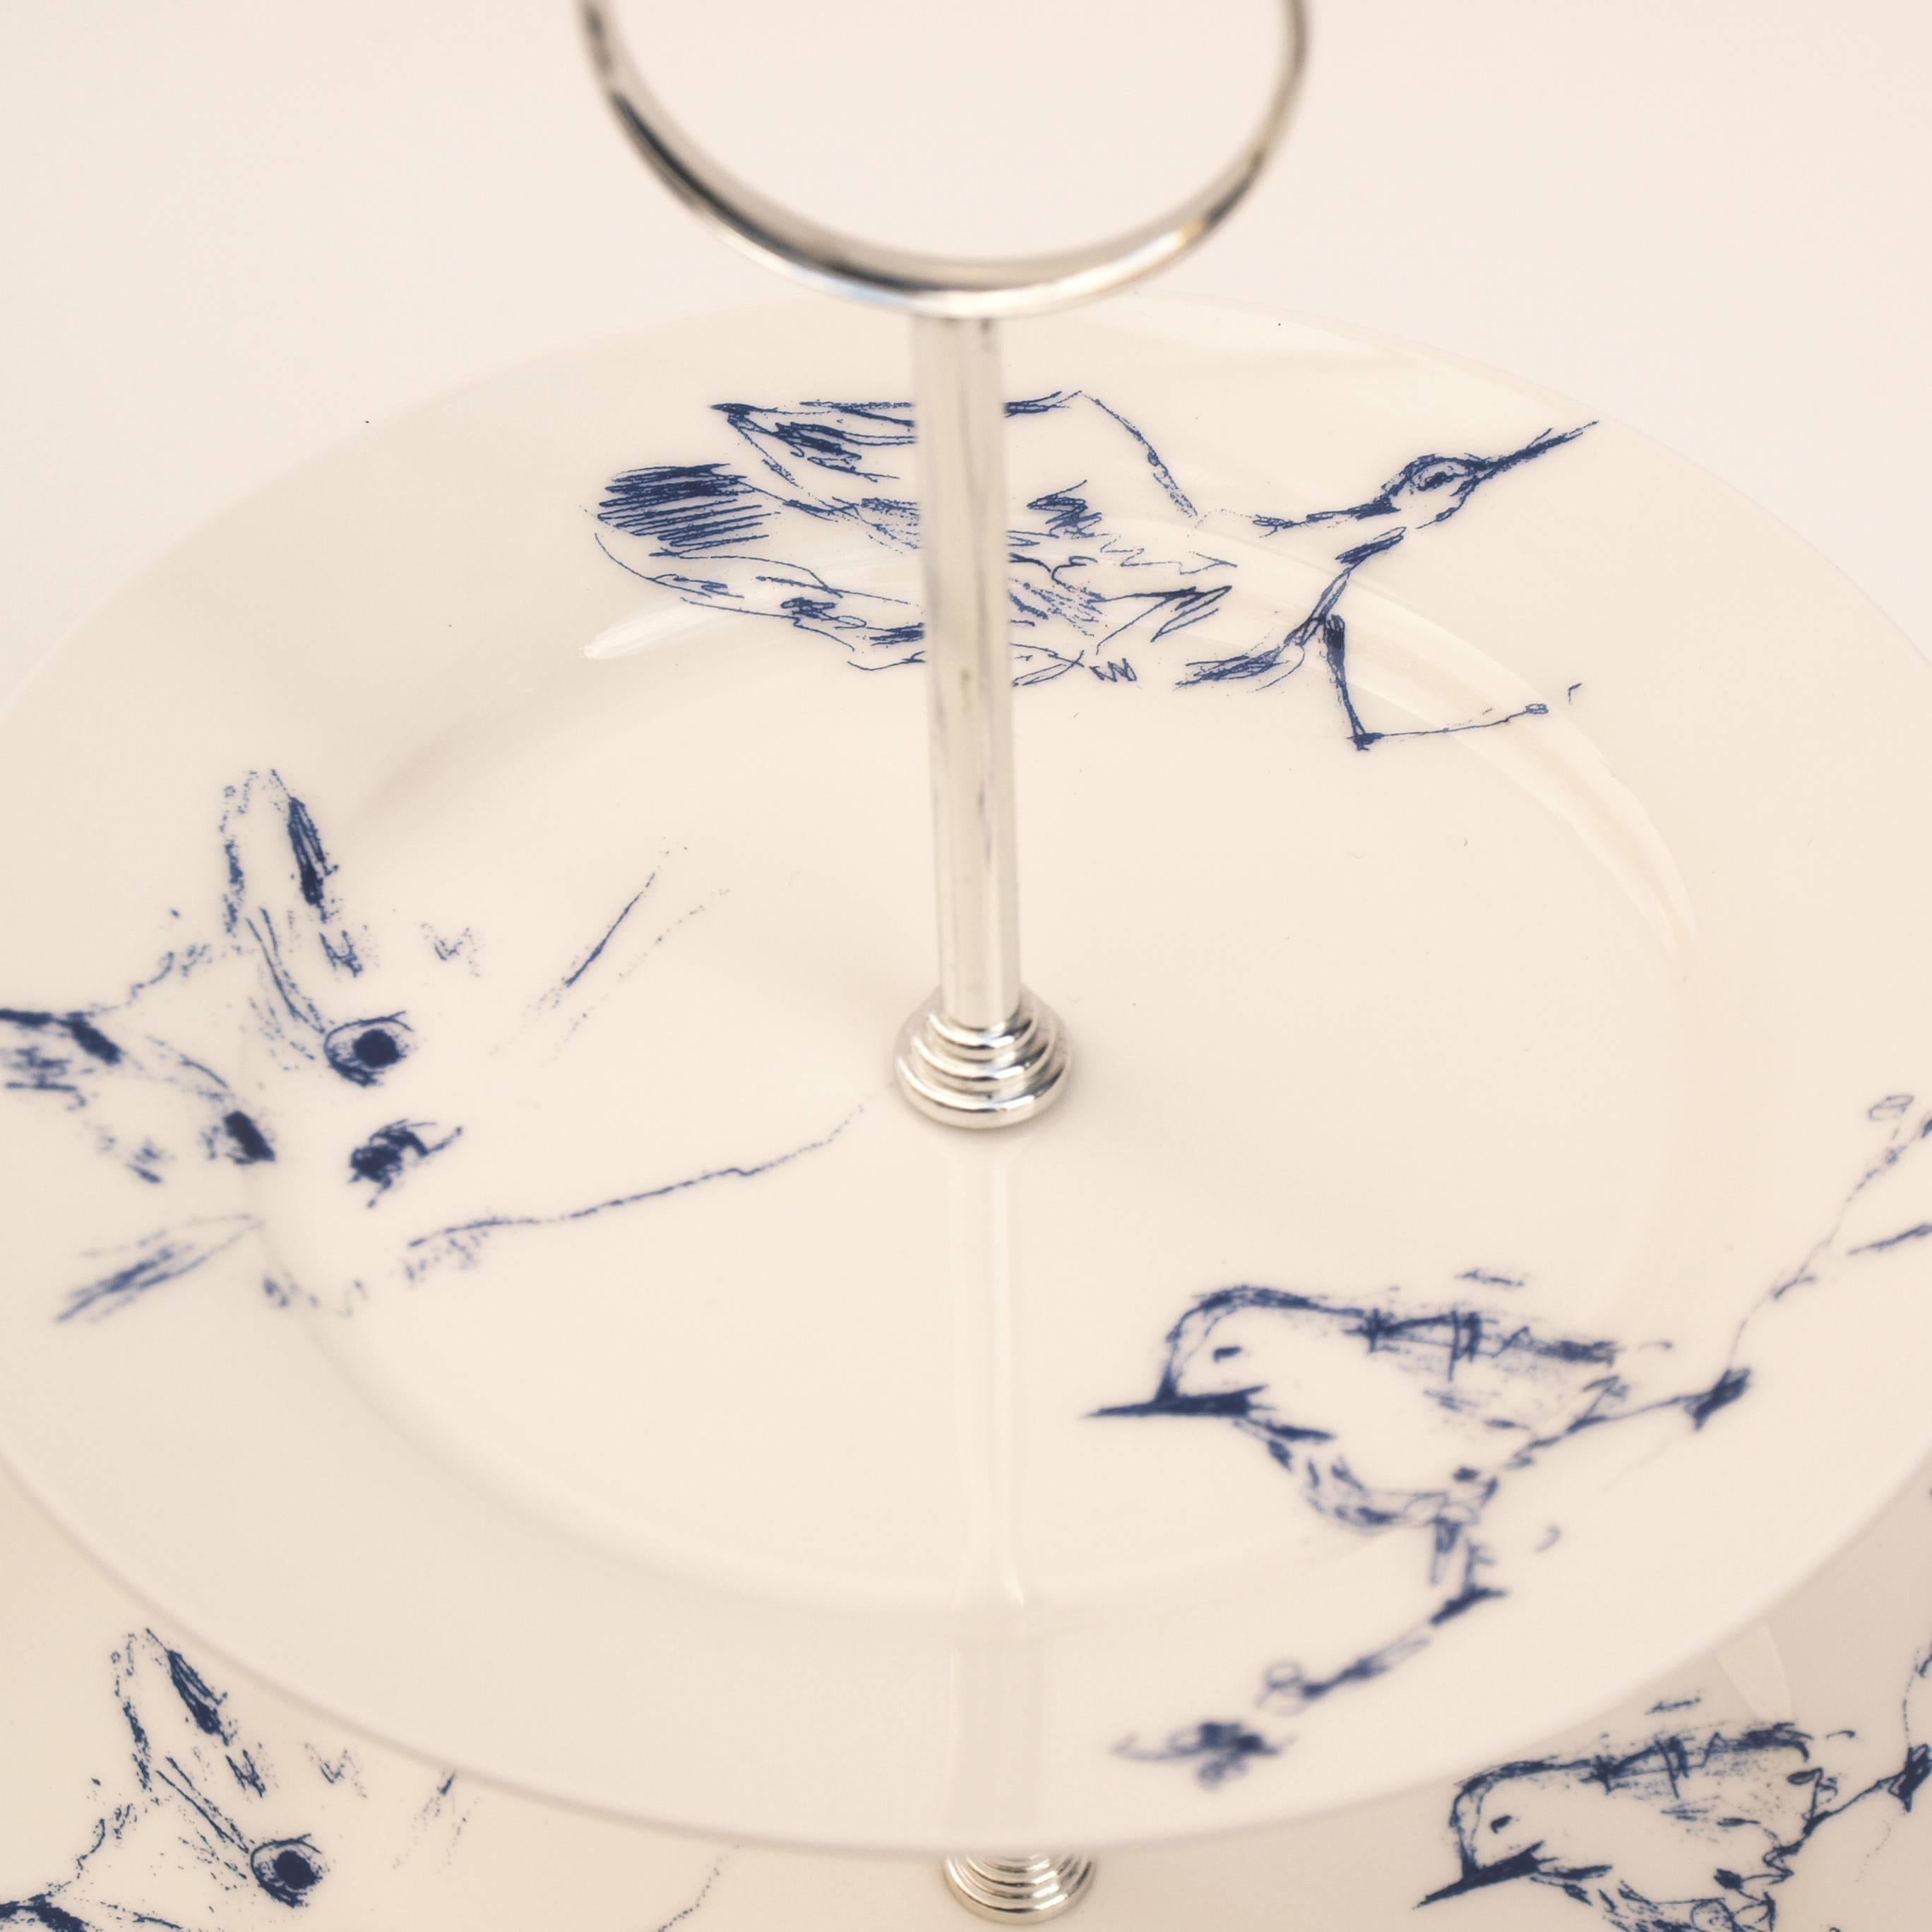 British Signed Tracey Emin Bone China Cake Stand, 'Docket and His Bird' Collection